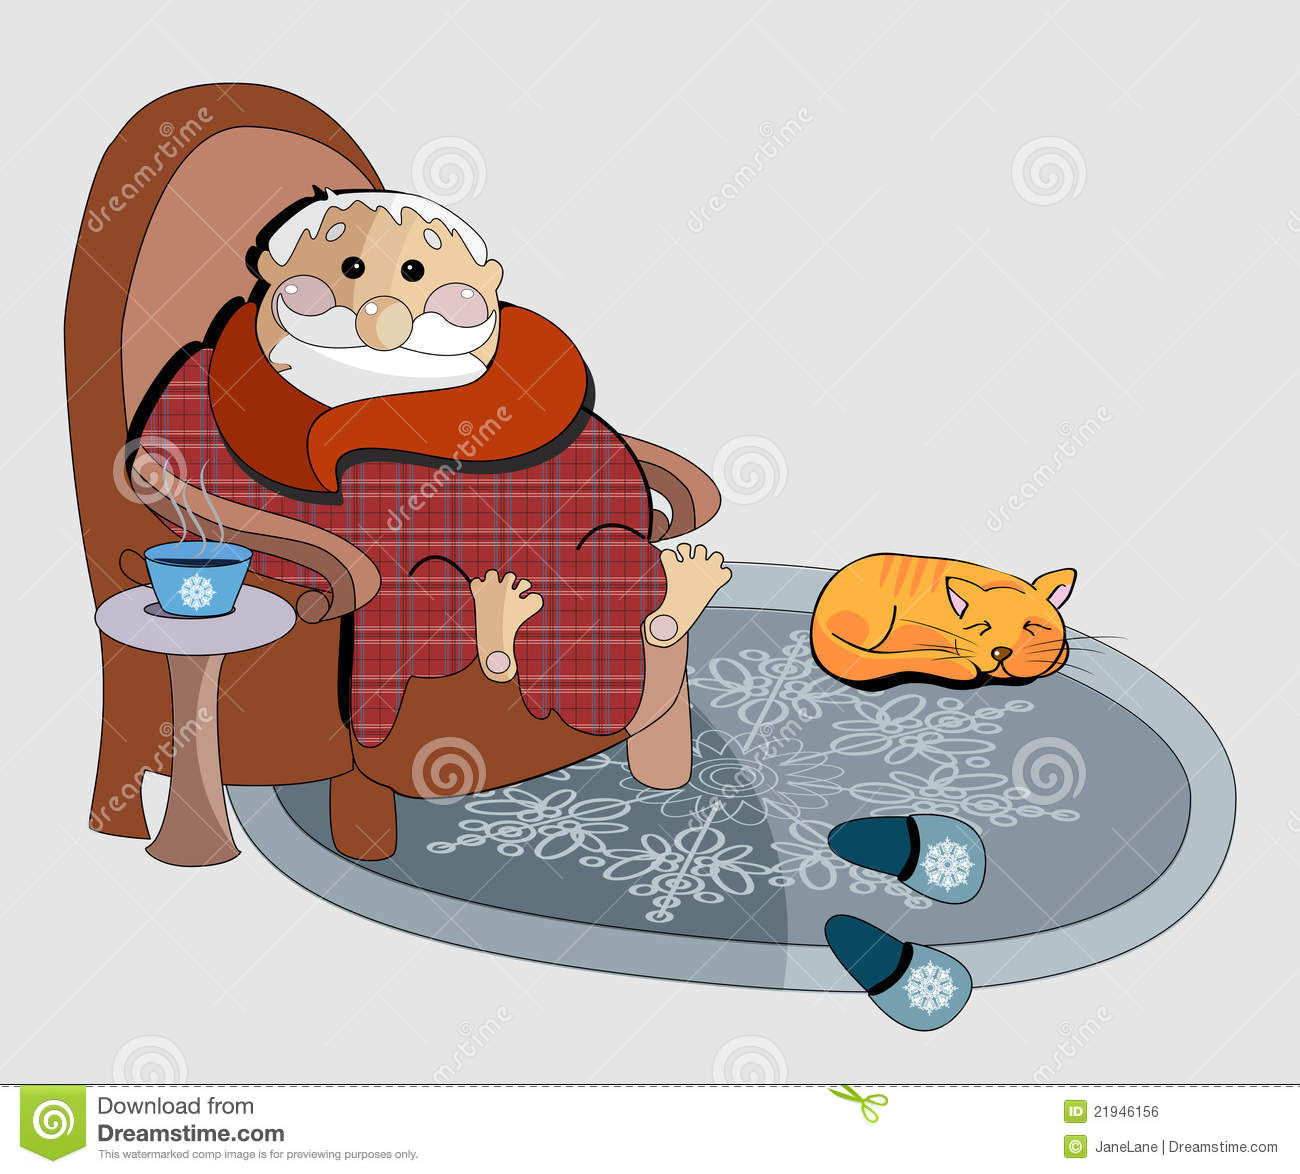 Clipart Illustration Of Of An Old Man In A Chair With A Cup Of Tea And